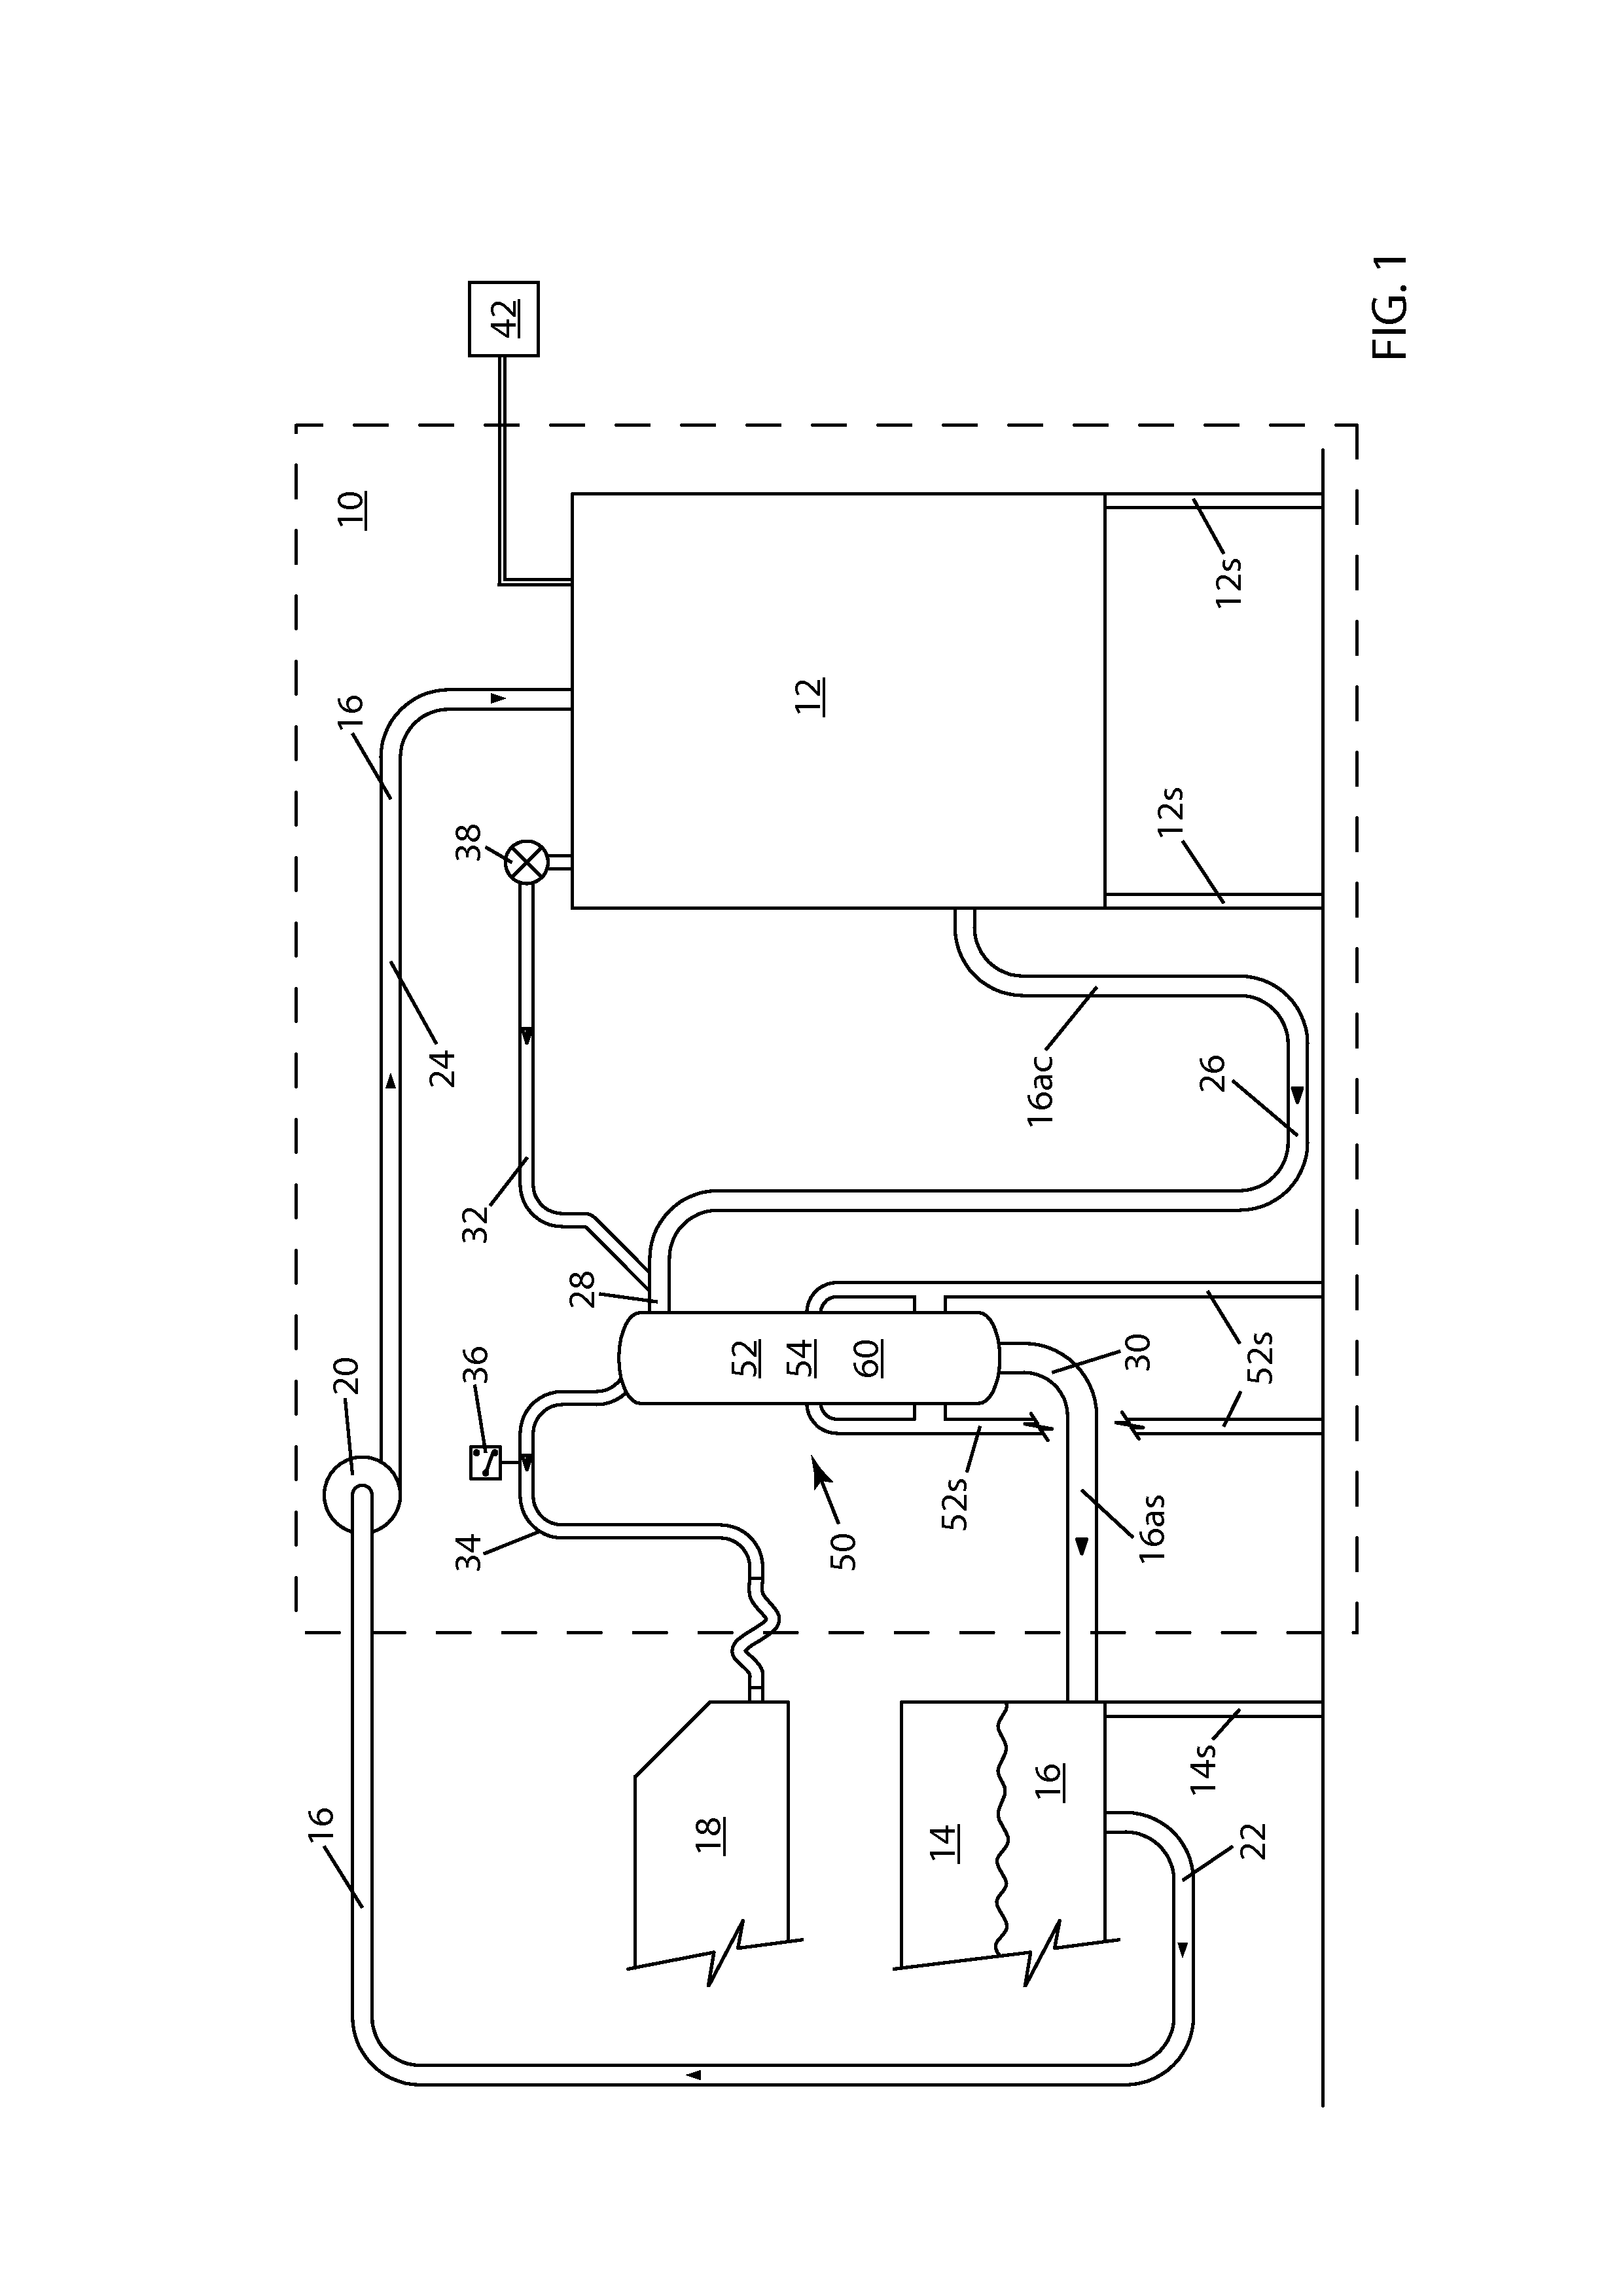 Oil-Filtration System with Oil-Fryer Separation for Automated Food-Fryers